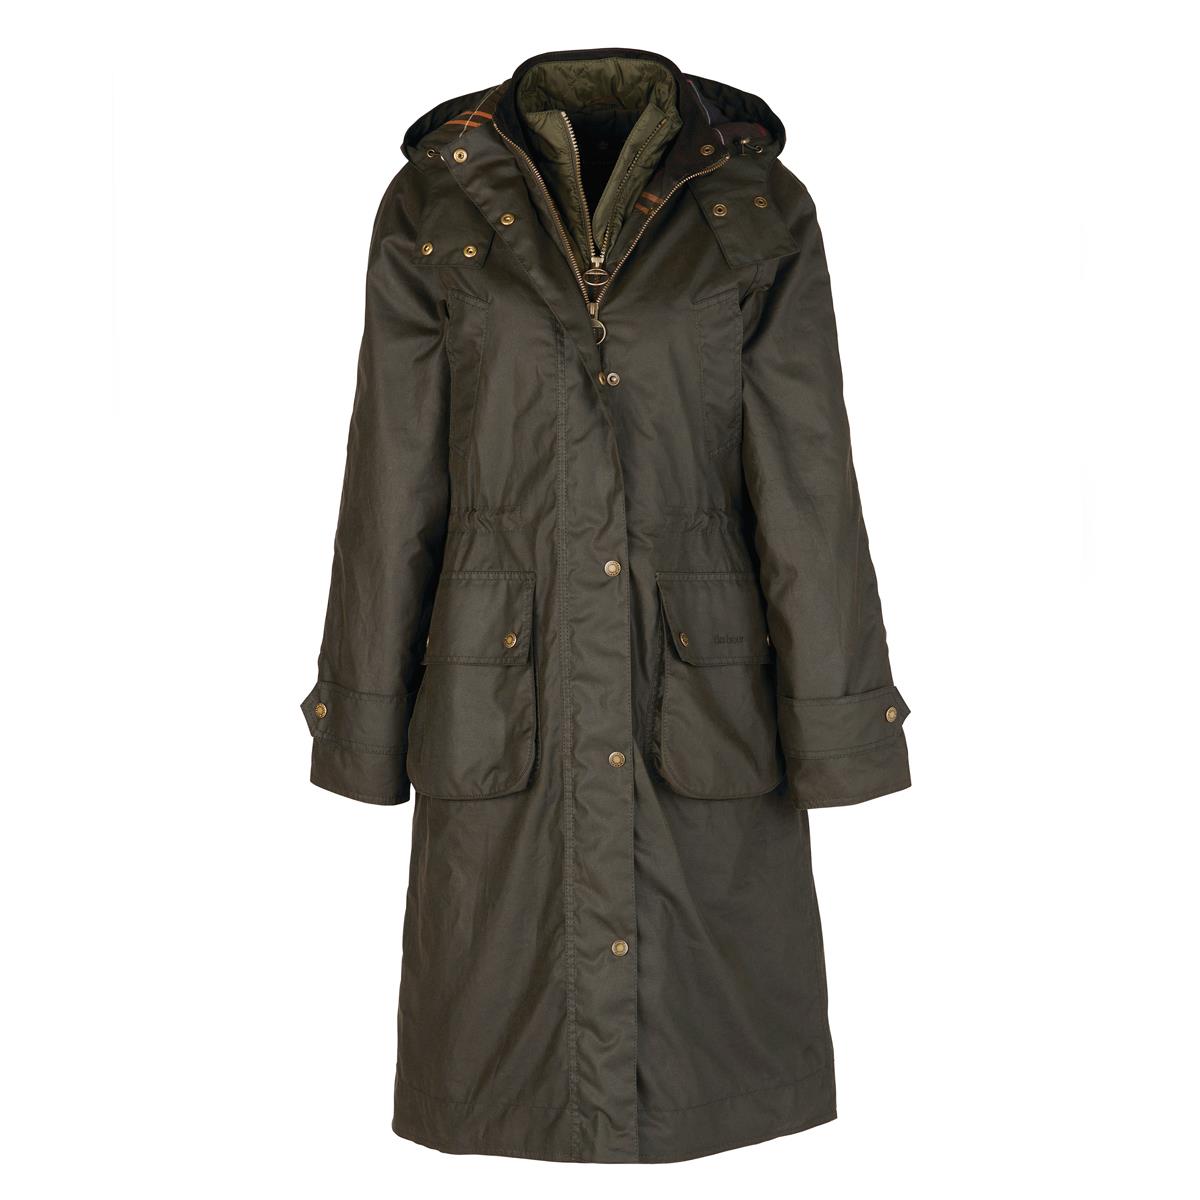 What are the key attributes of the Barbour Cannich Wax Jacket?